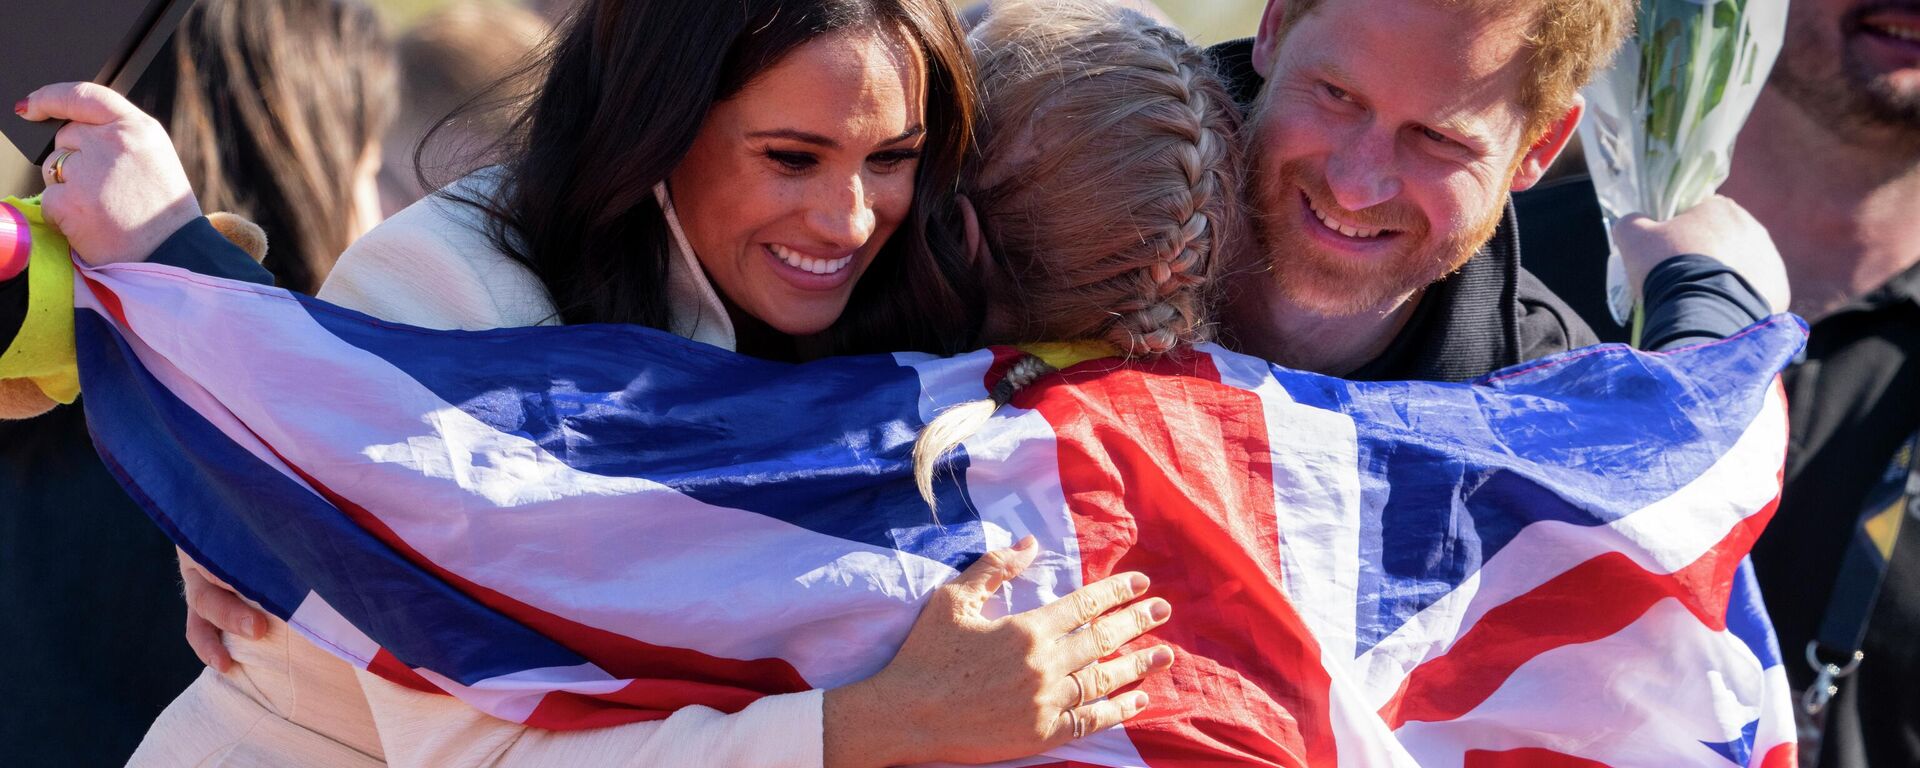 Prince Harry and Meghan Markle, Duke and Duchess of Sussex, hug Lisa Johnston, a former army medic and amputee, who celebrates with her medal at the Invictus Games venue in The Hague, Netherlands, Sunday, April 17, 2022 - Sputnik International, 1920, 22.04.2022